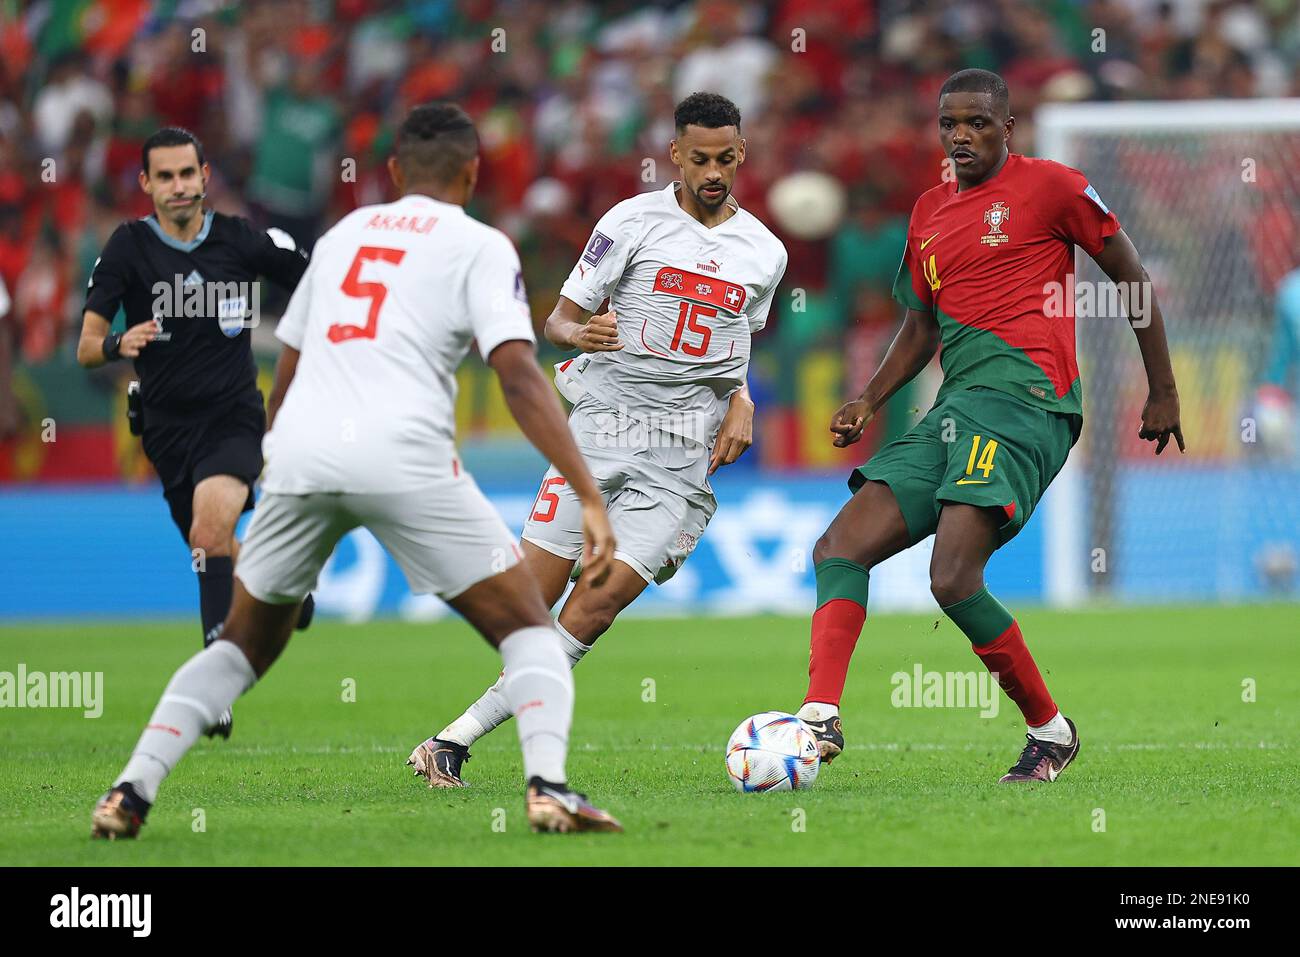 LUSAIL CITY, QATAR - DECEMBER 06: Djibril Sow, William Carvalho during the FIFA World Cup Qatar 2022 Round of 16 match between Portugal and Switzerland at Lusail Stadium on December 6, 2022 in Lusail City, Qatar. (Photo by MB Media) Stock Photo